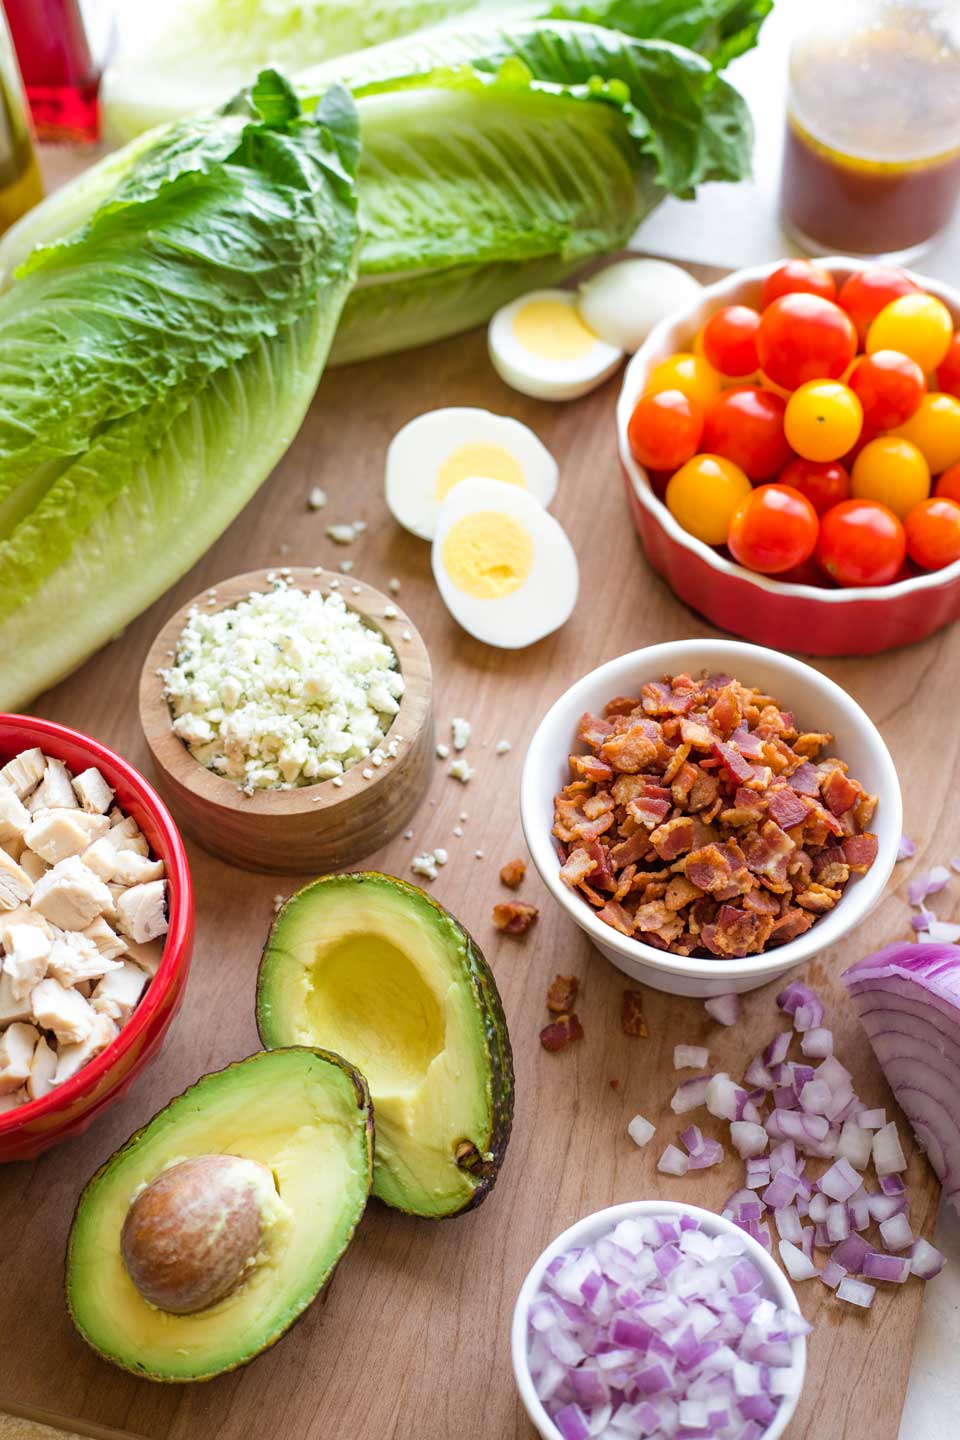 cutting board with prepped chicken Cobb Salad ingredients - romaine lettuce, hard-boiled eggs, cooked bacon, red onion, chicken, avocado and cherry tomatoes